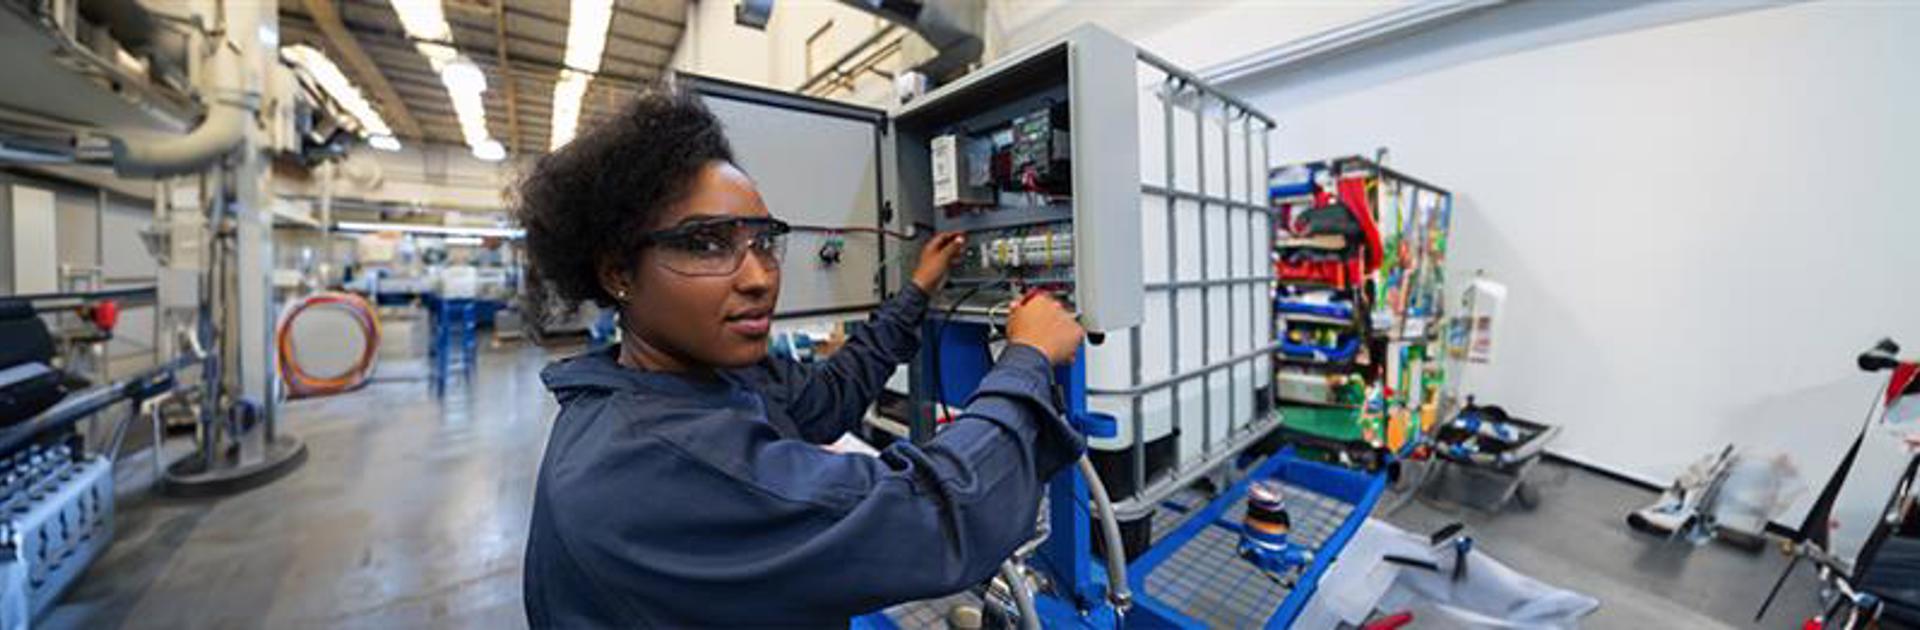 Female trades student practicing on electric switchboard